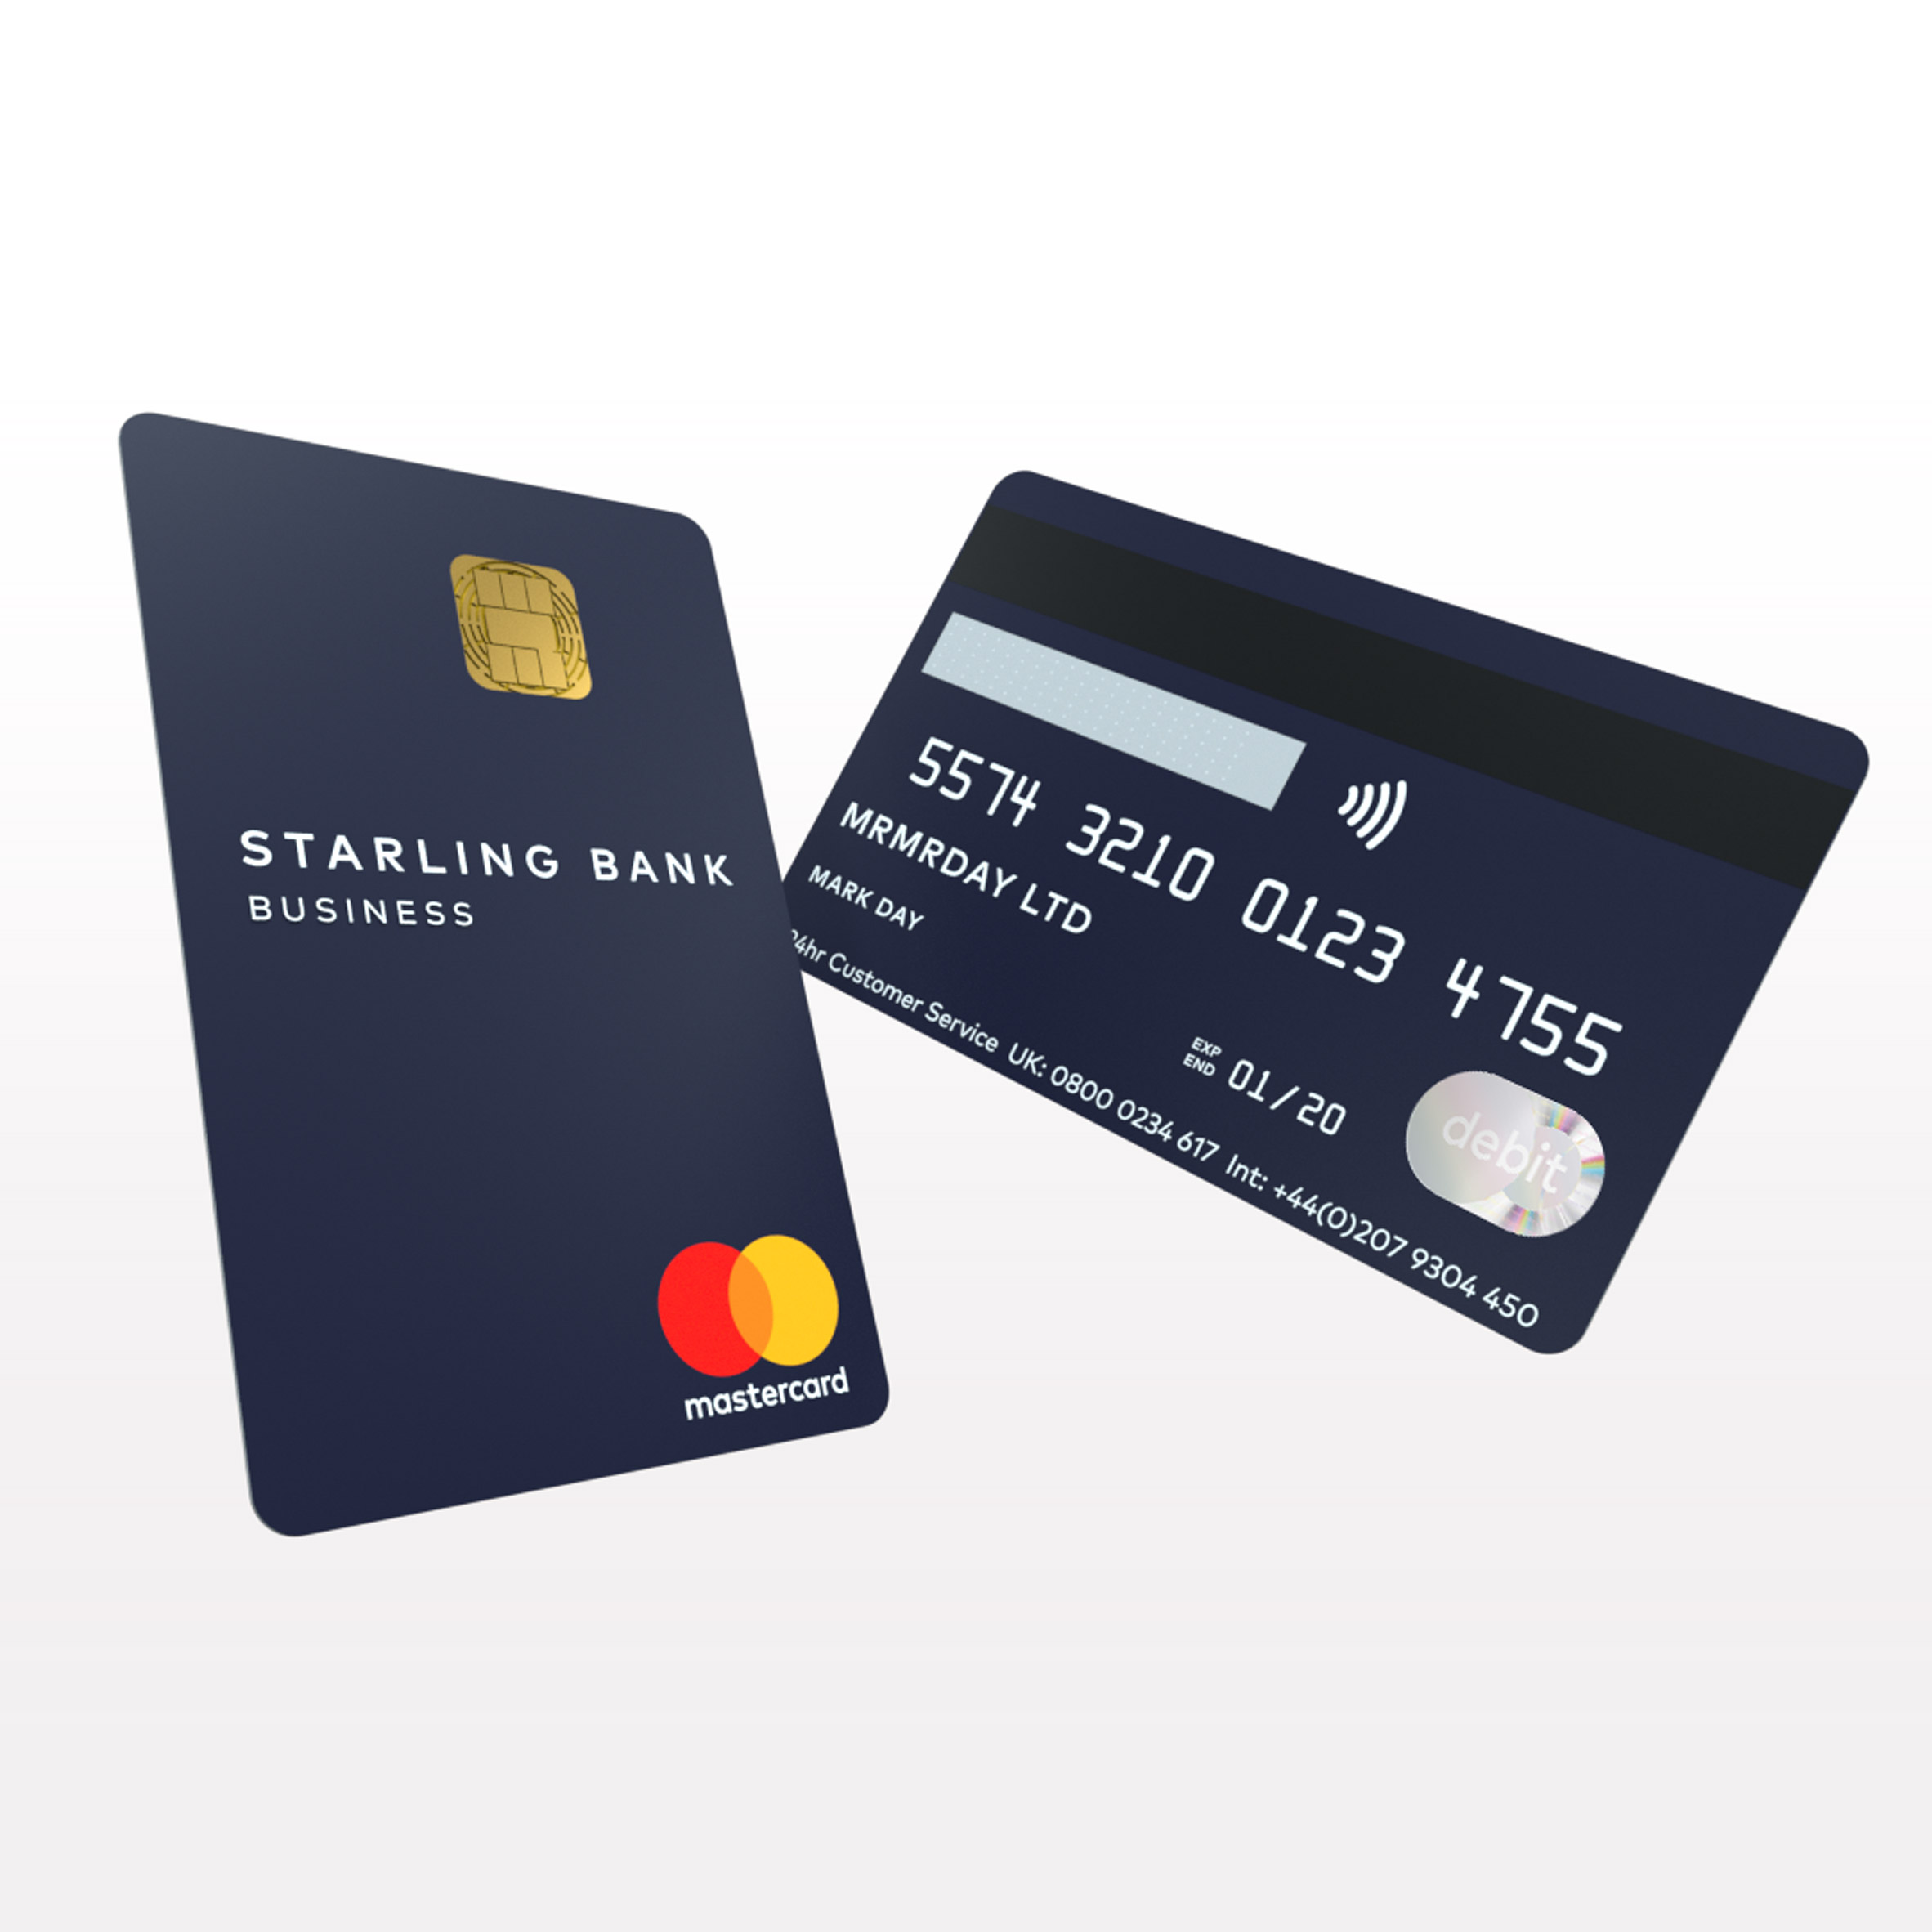 Starling bank launches vertical debit card